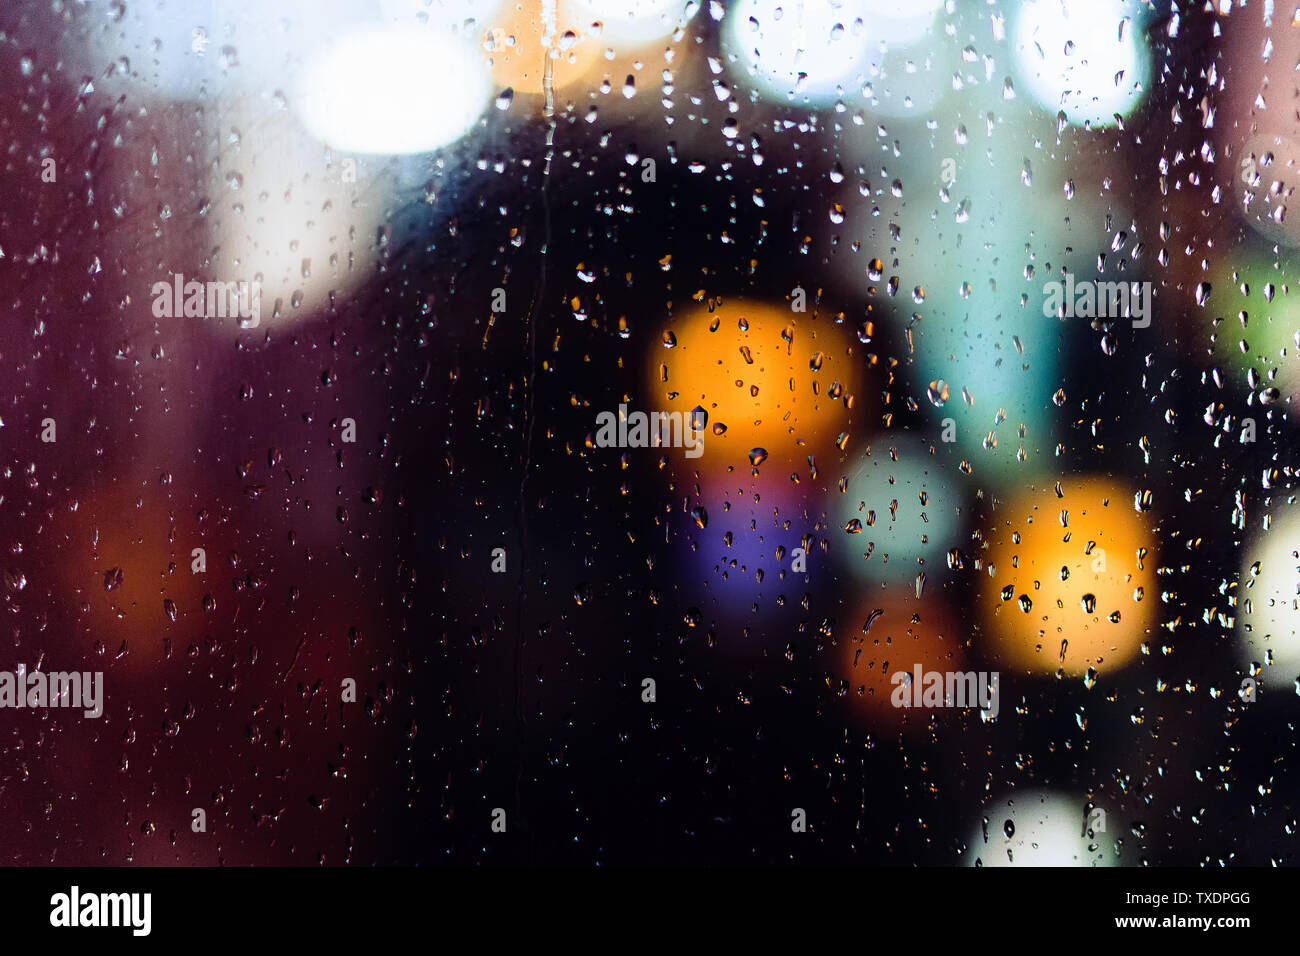 Rain Wallpapers (46+ images inside)